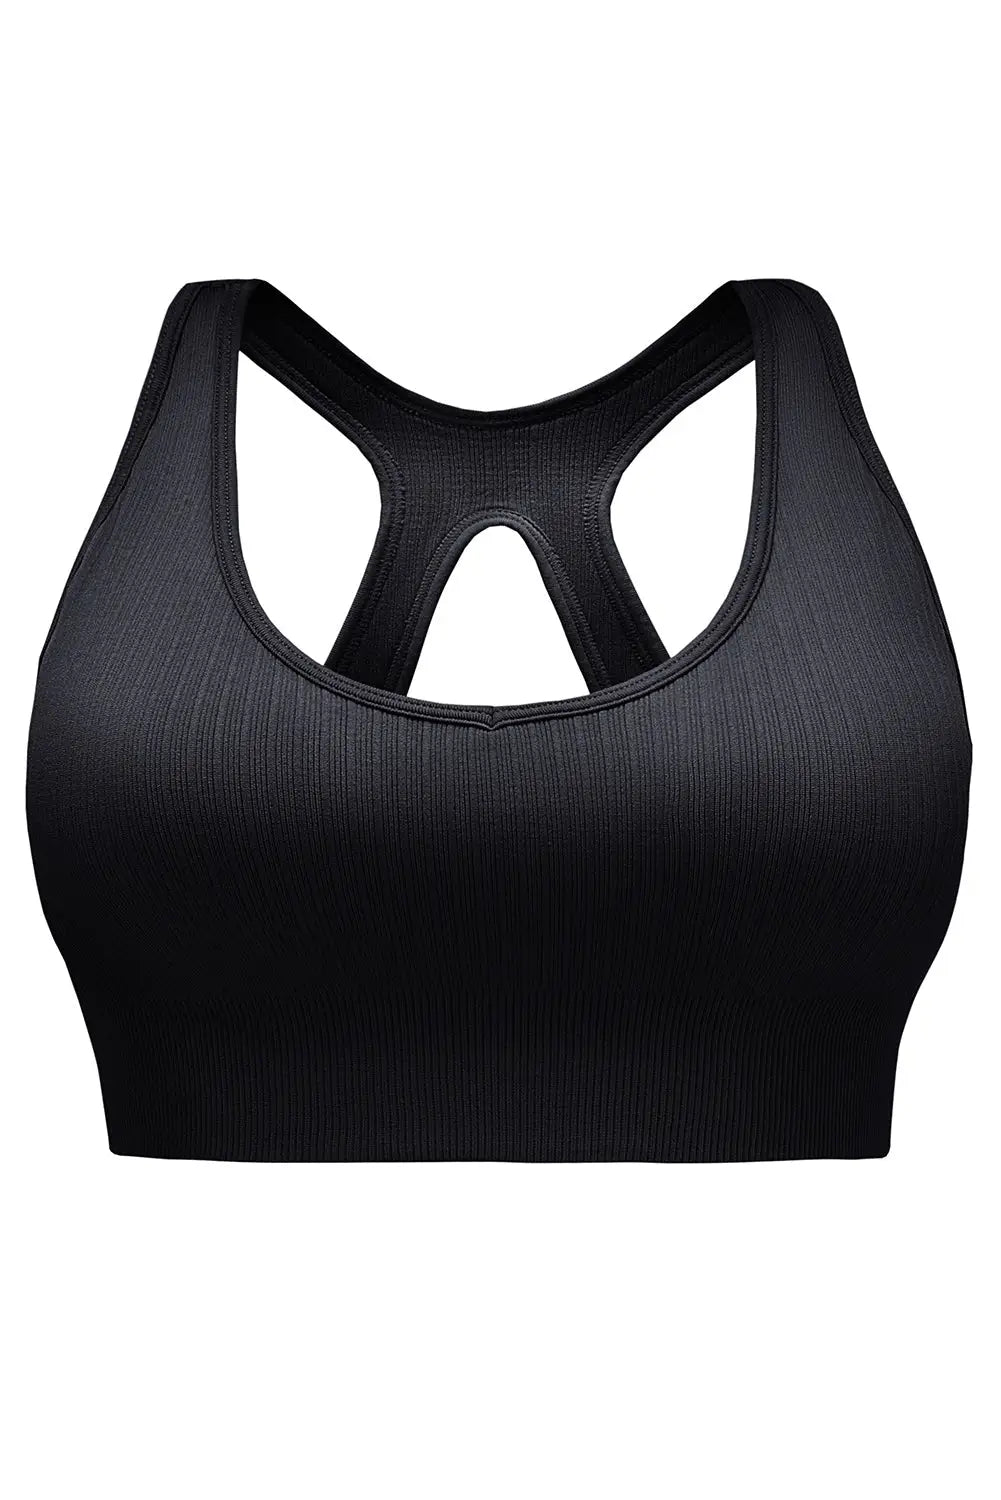 Black ribbed hollow-out racerback yoga camisole - sports cami